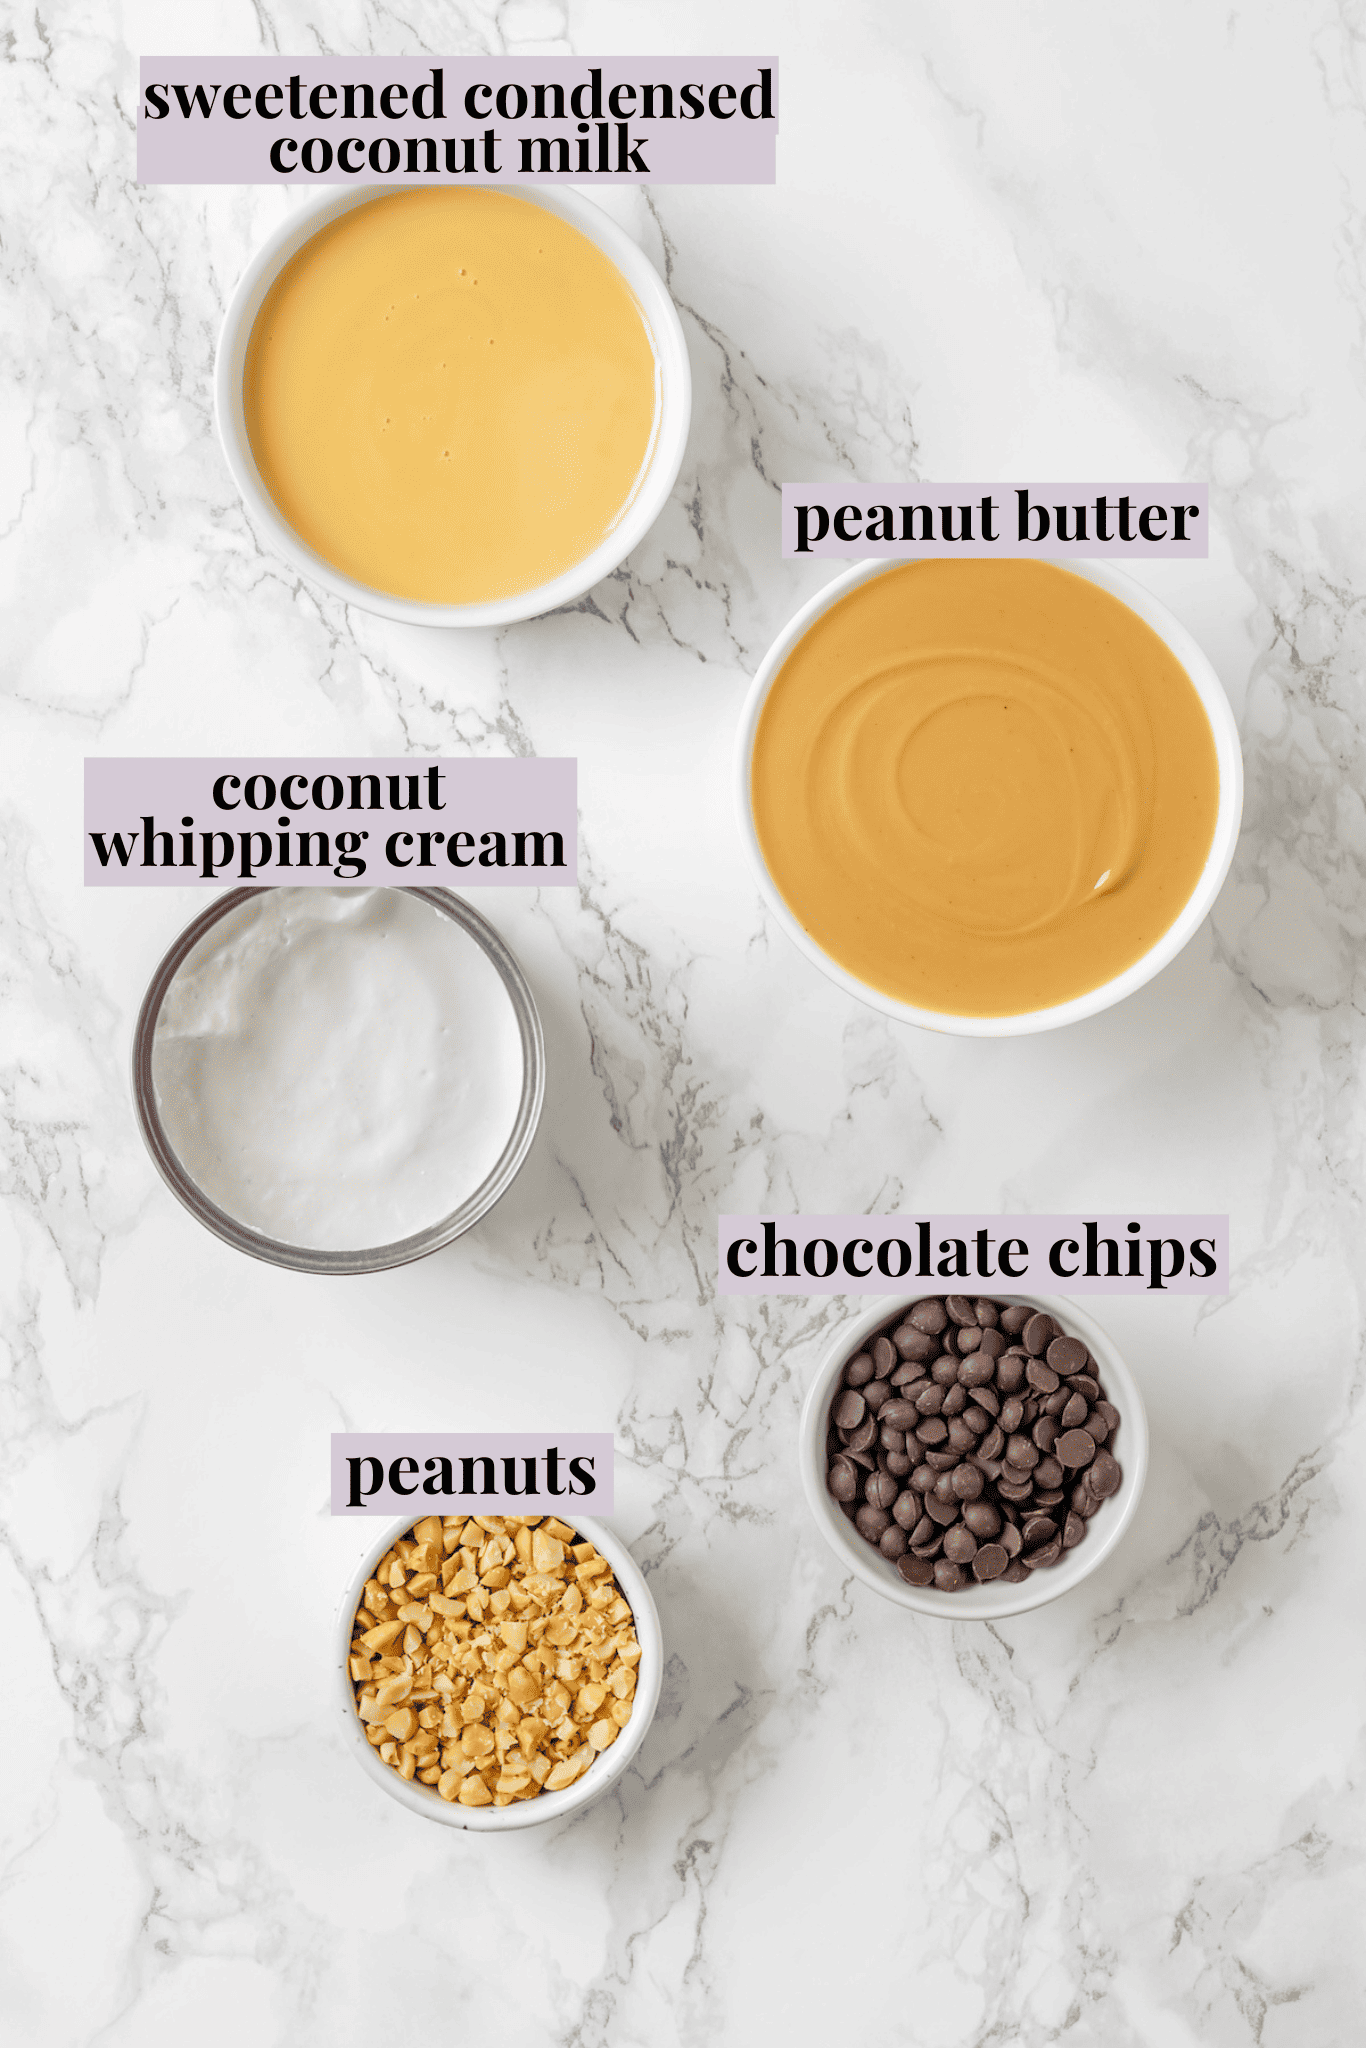 Overhead view of ingredients for peanut butter ice cream with labels